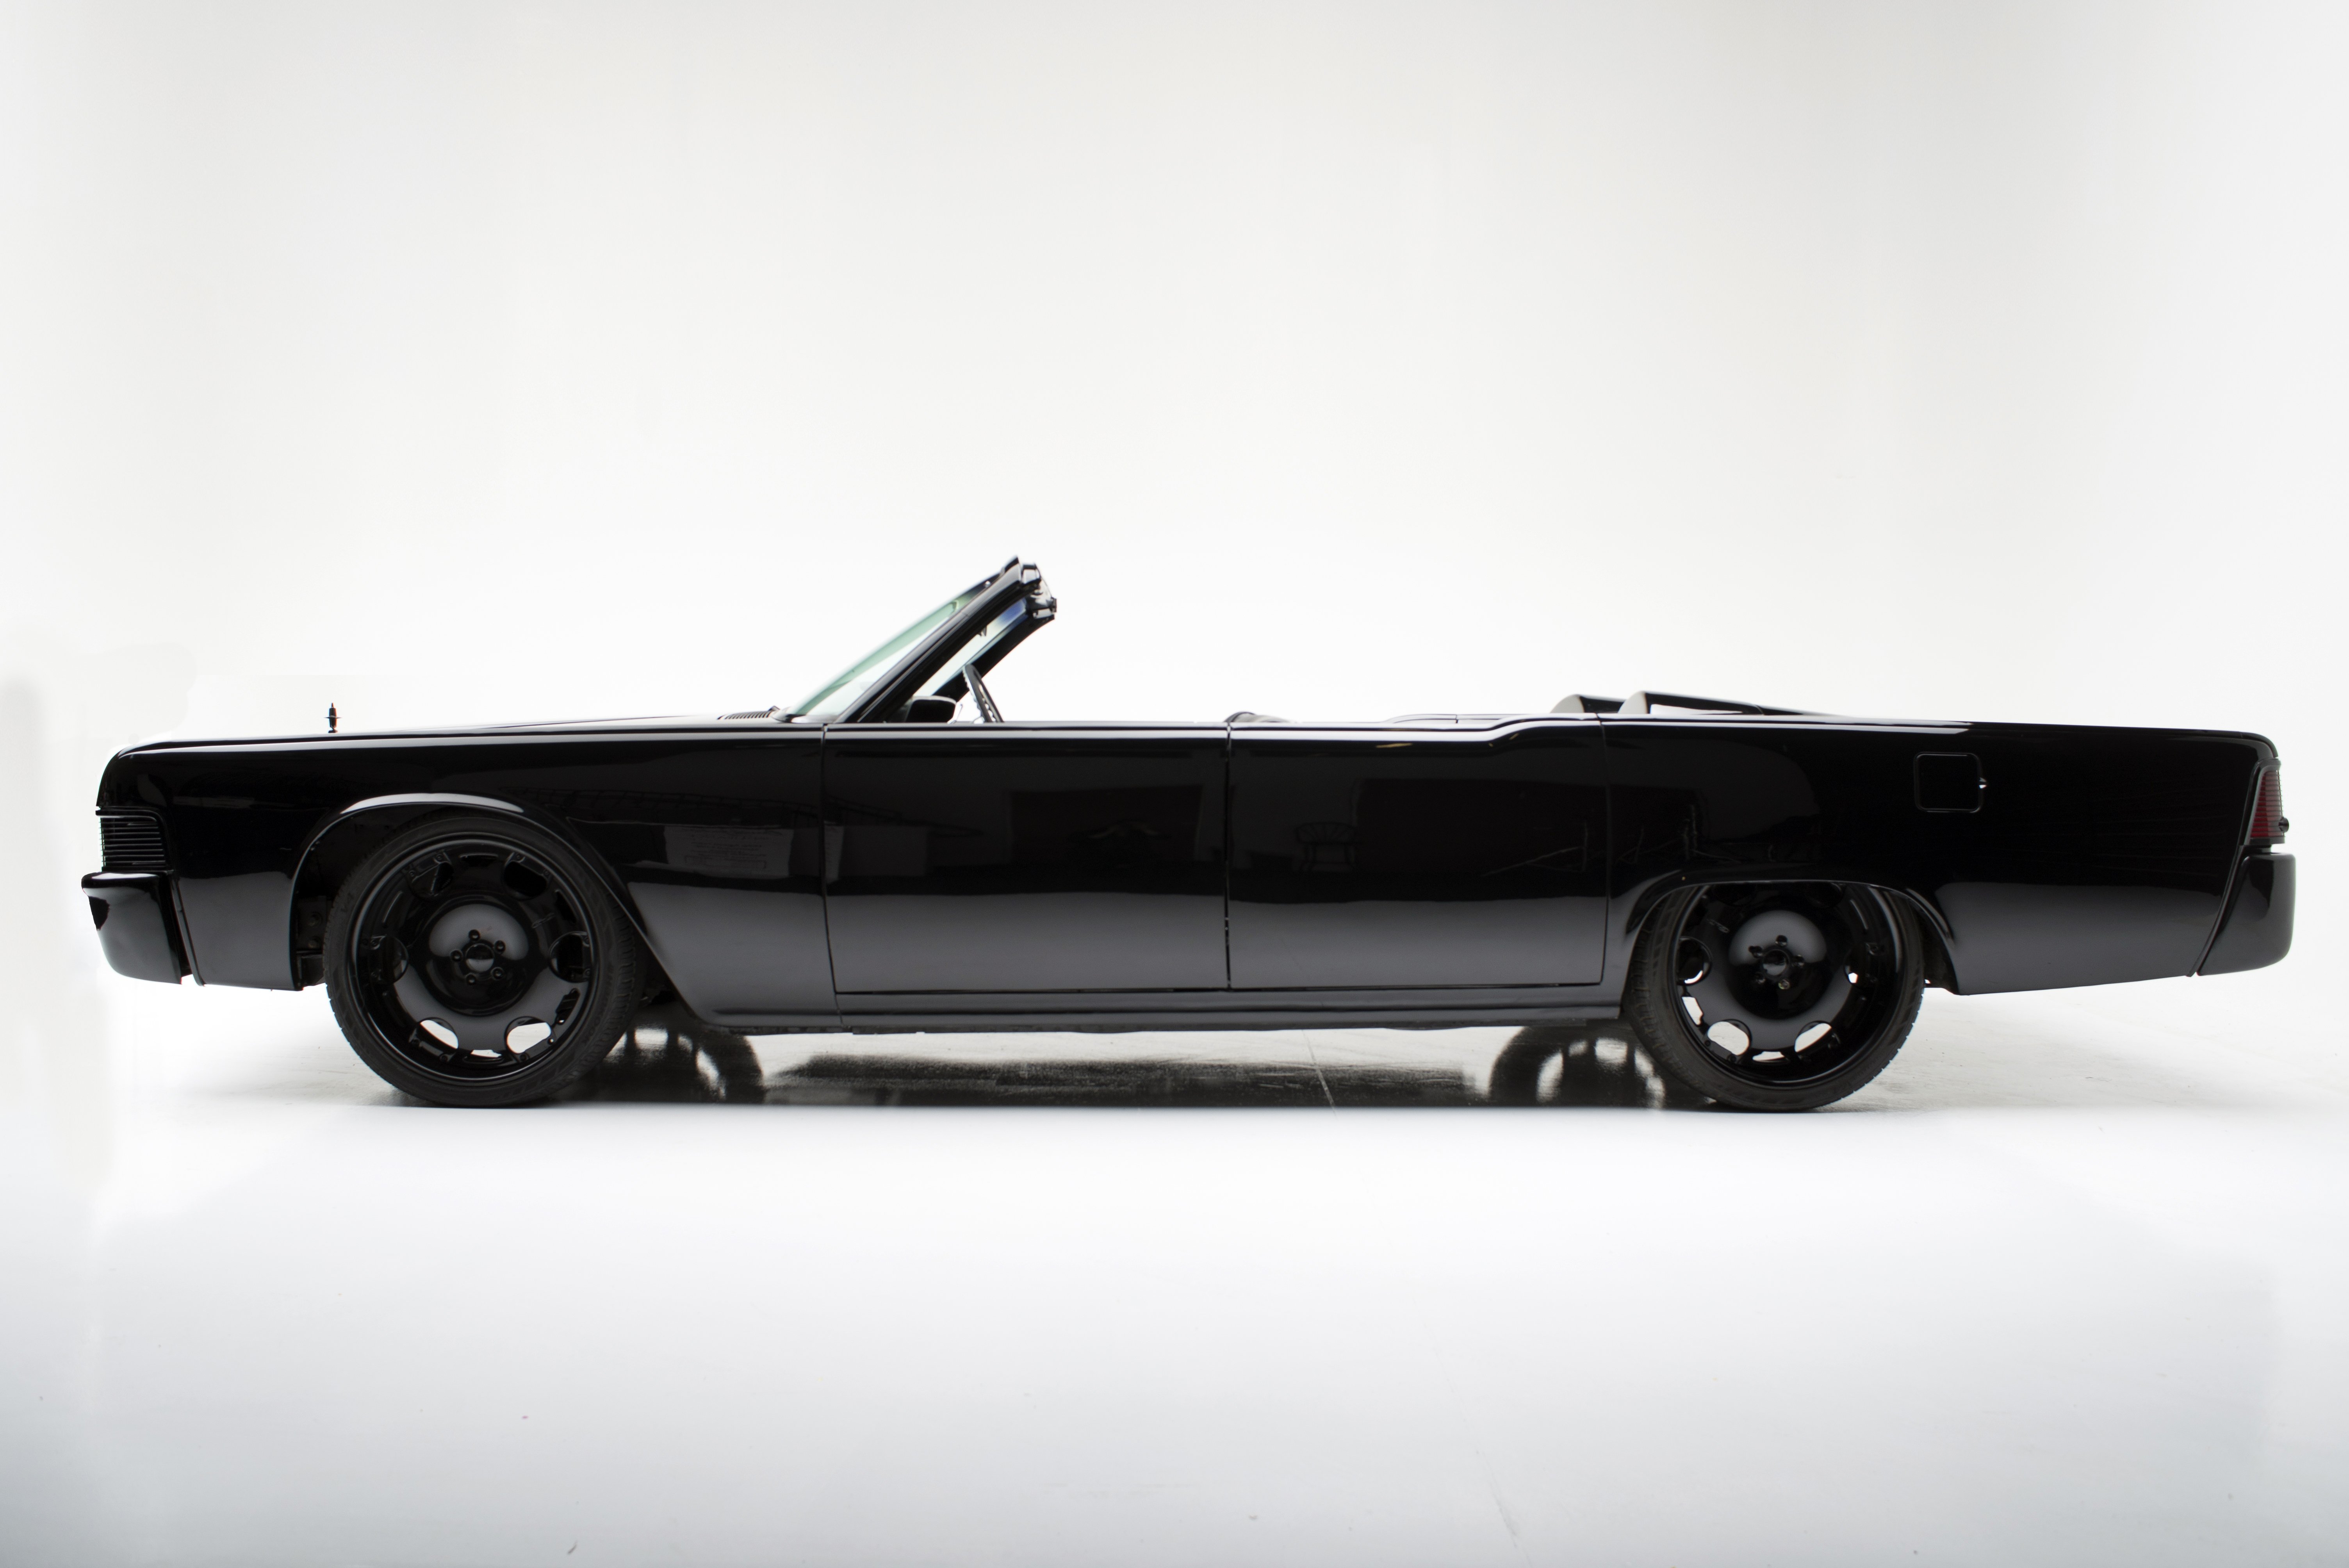 1965, Lincoln, Continential, Custom, Roadster, Luxury, Classic, Tuning Wallpaper